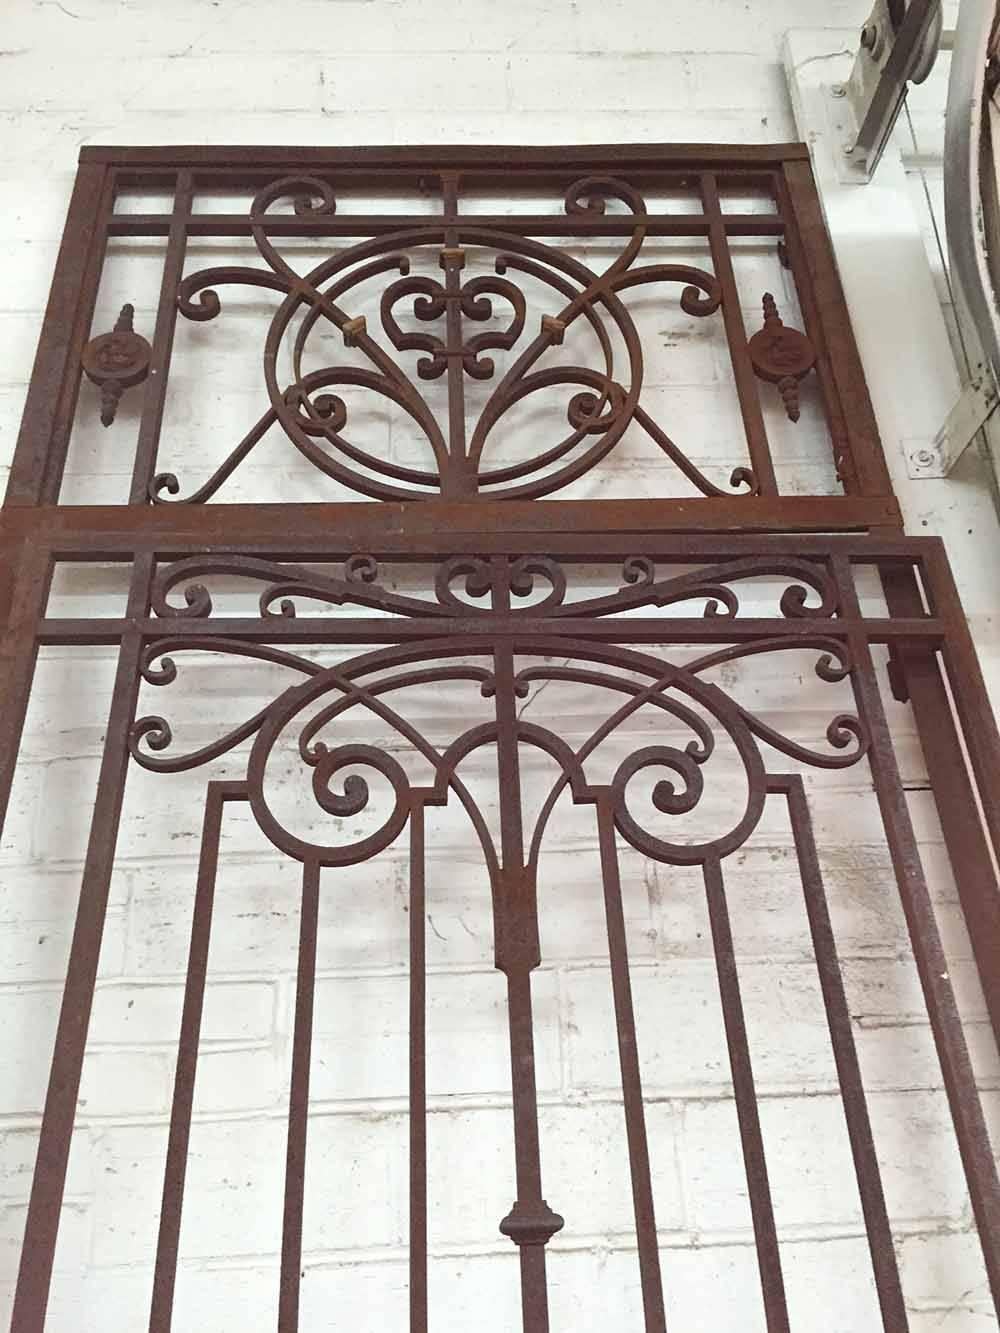 Imported from France, this antique iron gate includes a mail slot and a transom.

Origin: France

circa 1890